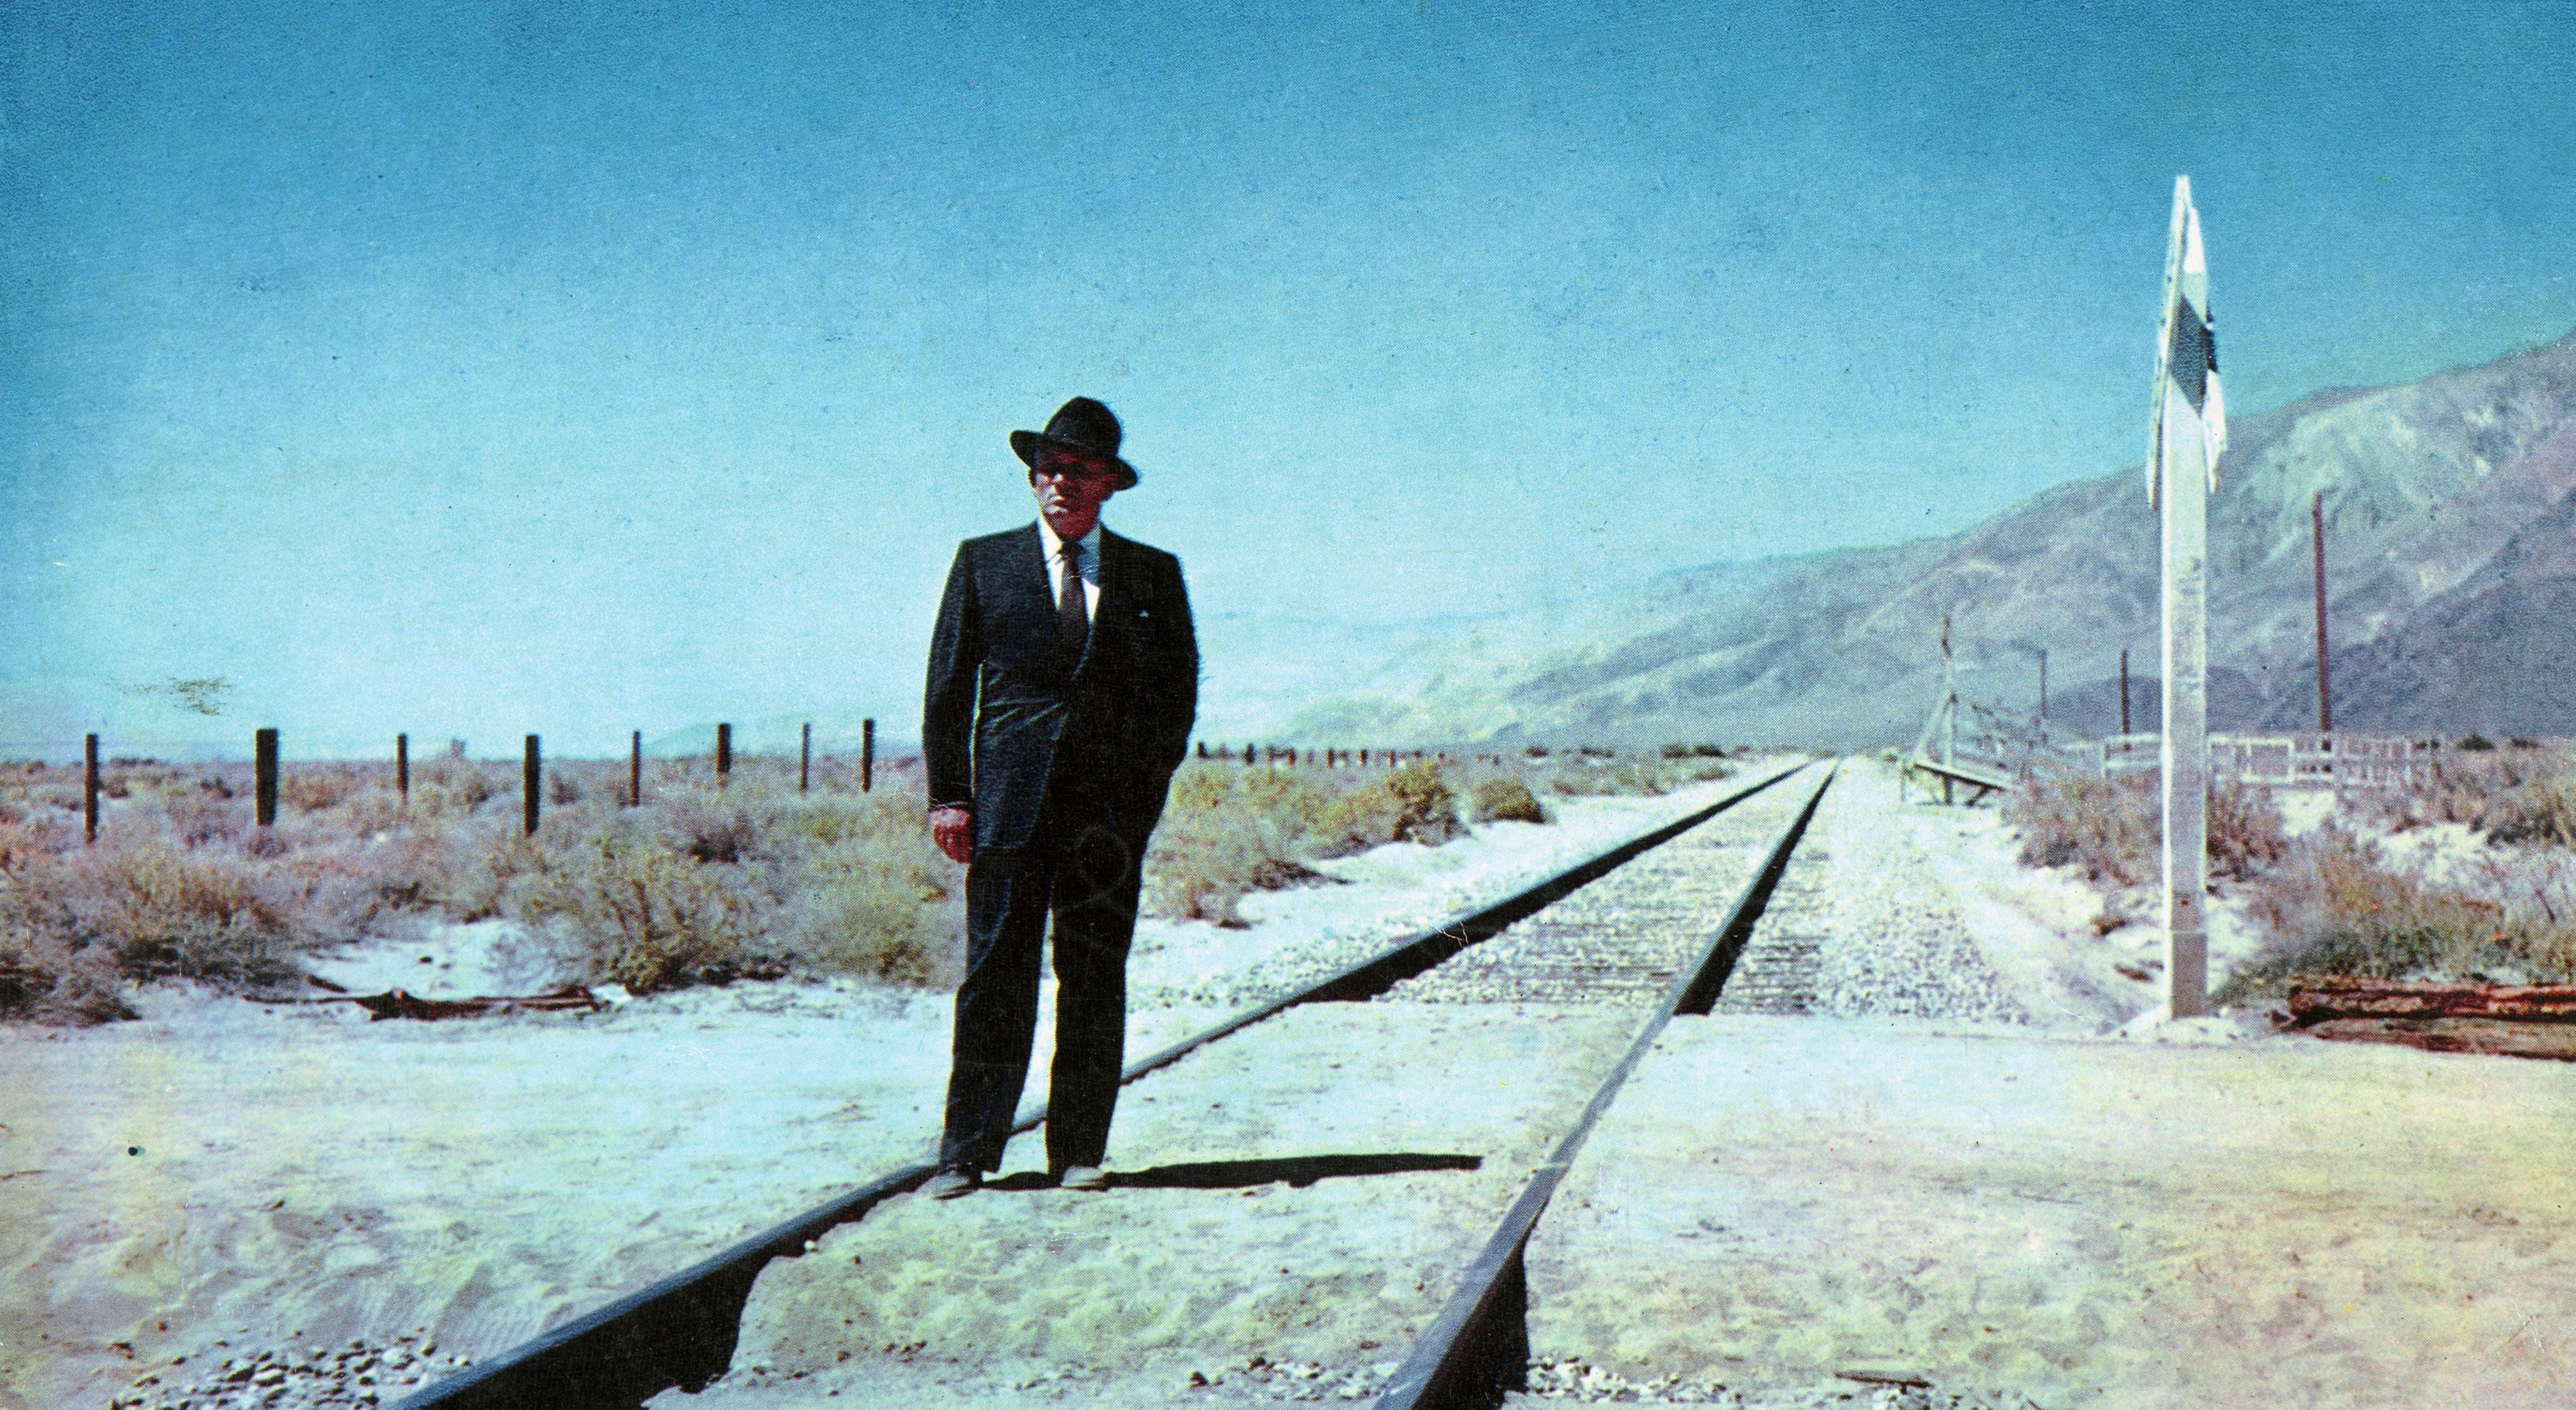 A one-armed man in a black suit and fedora stands on a railroad track in the middle of nowhere against a blue sky